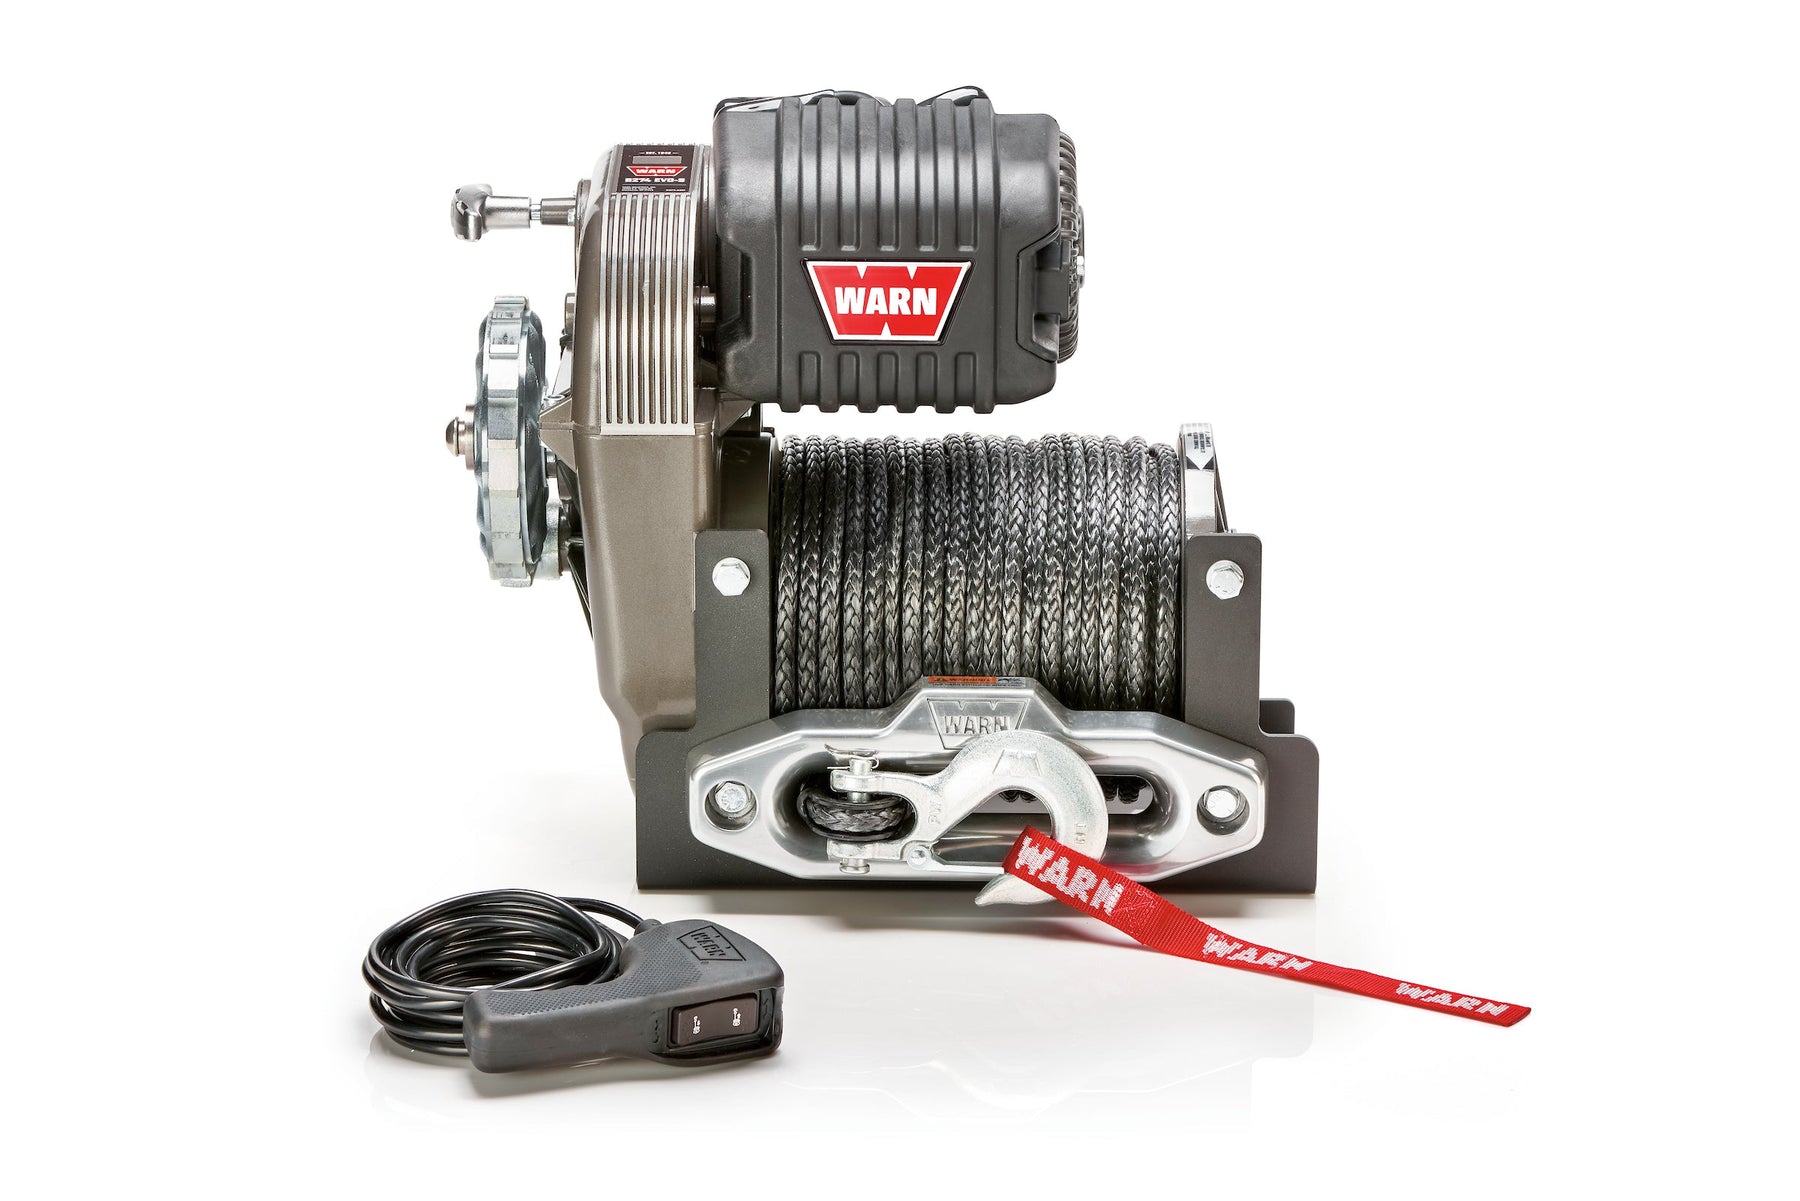 Warn M8274-S 10K Winch - 106175 [Synthetic Rope]  Winches Warn- Adventure Imports